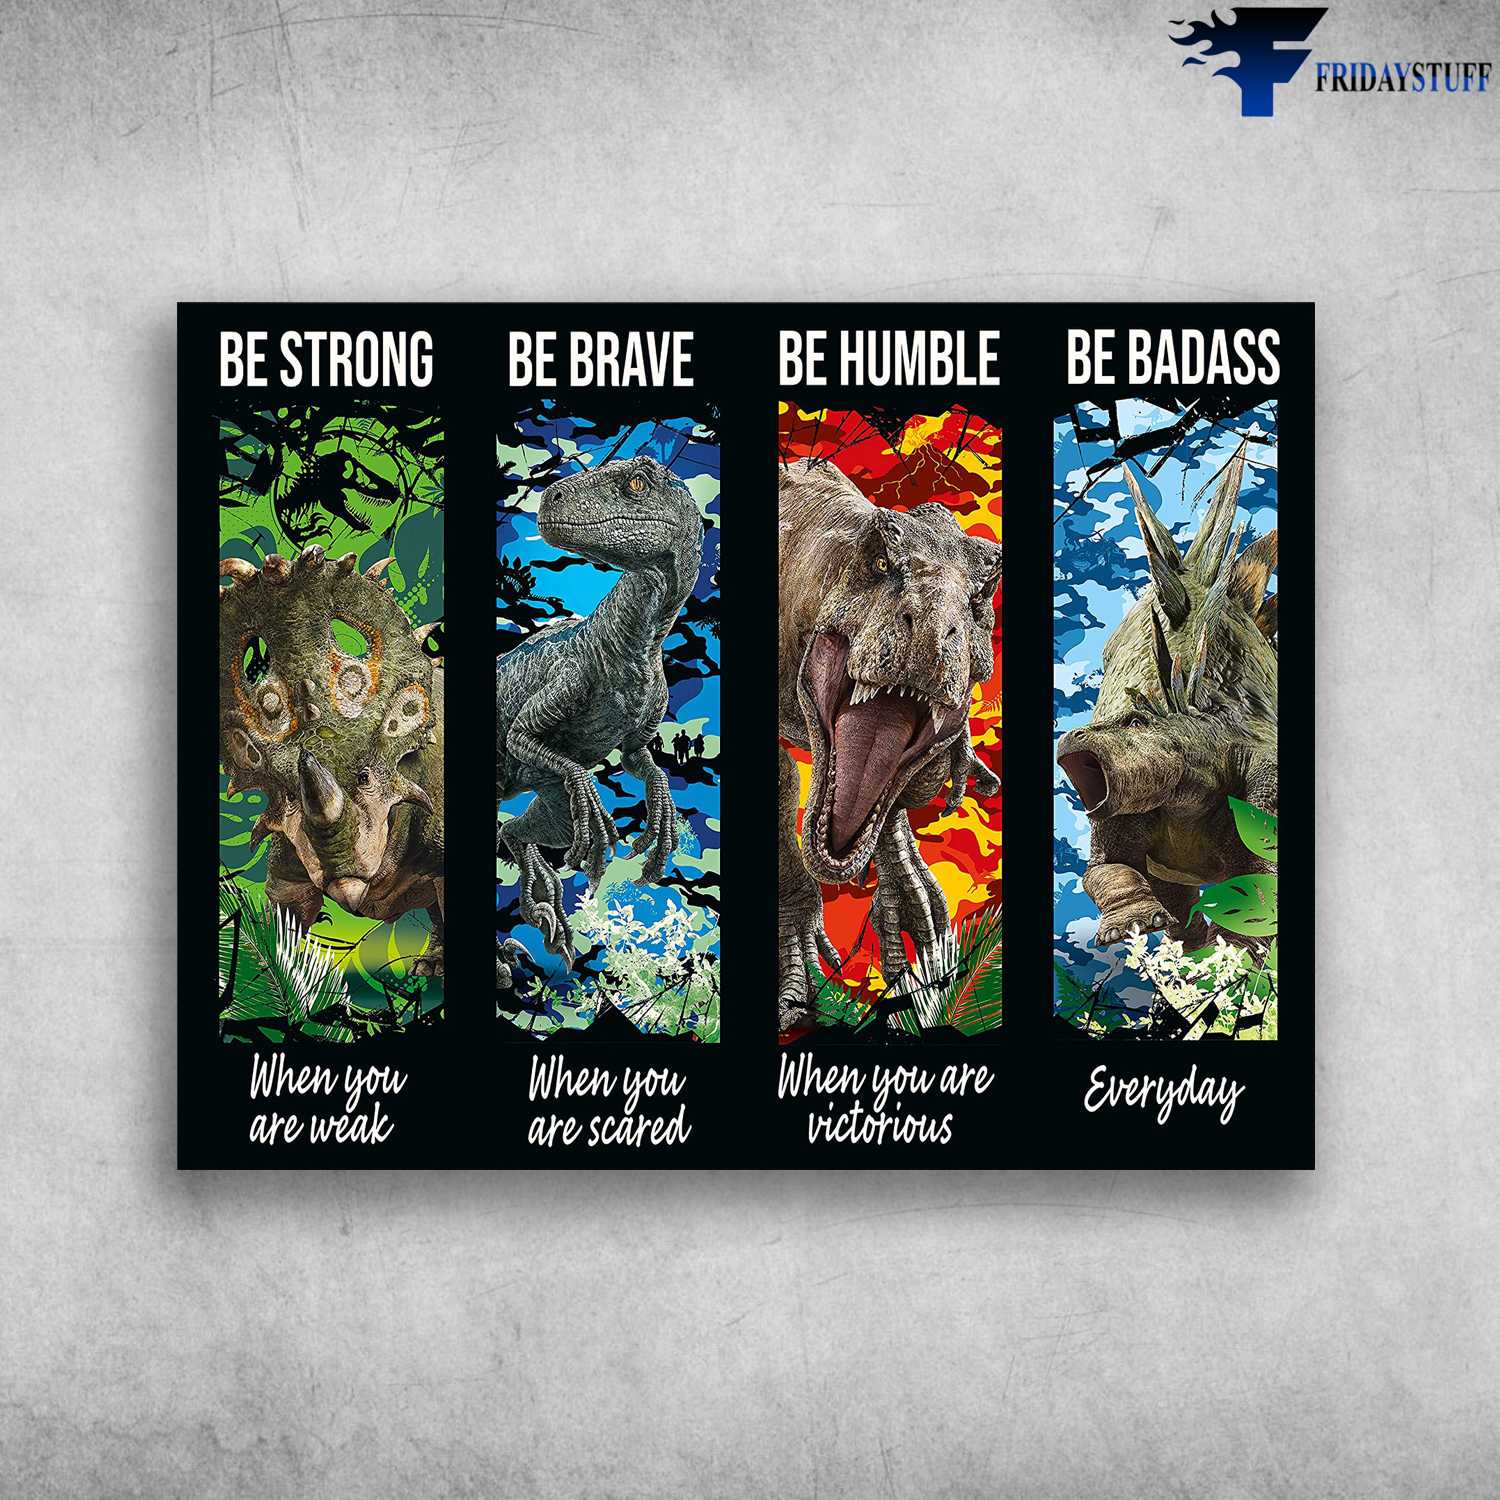 Dinosaurs Poster - Be Strong When You Are Weak, Be Brave When You Are Scared, Be Humble When You Are Victorious, Be Badass Everyday